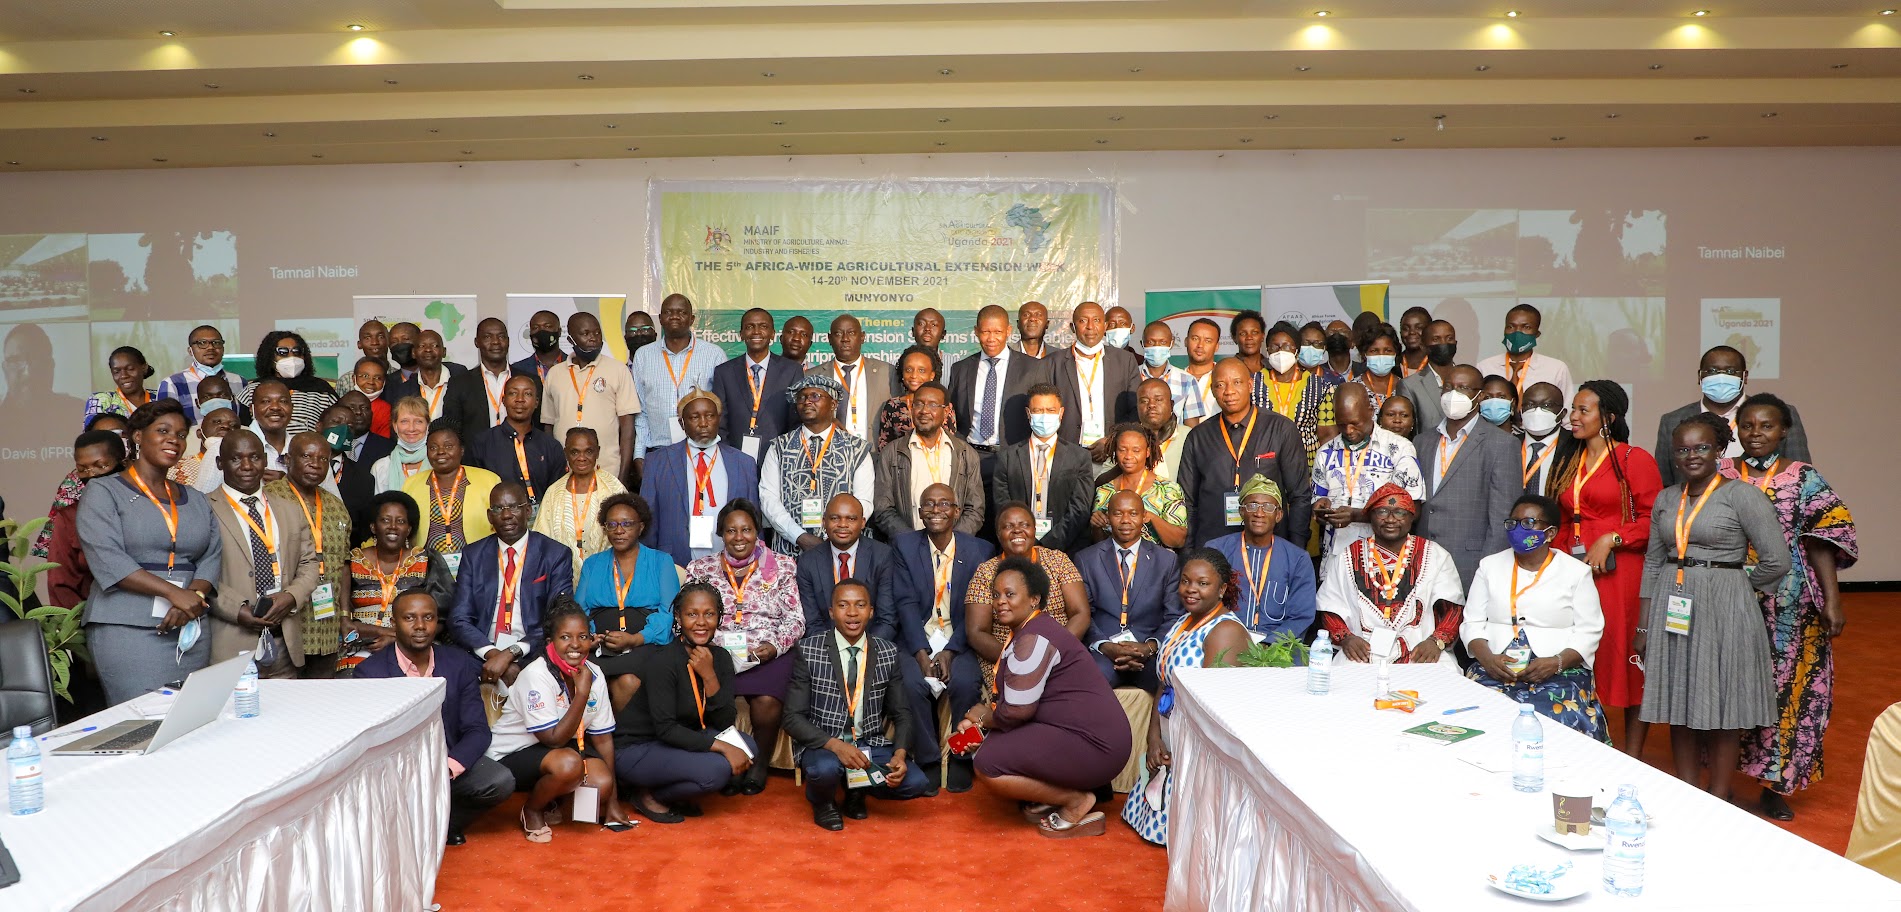 Delegates during the Africa-Wide Agriculture Extension Week 2021 (AAEW2021), (Nov, 14-20).